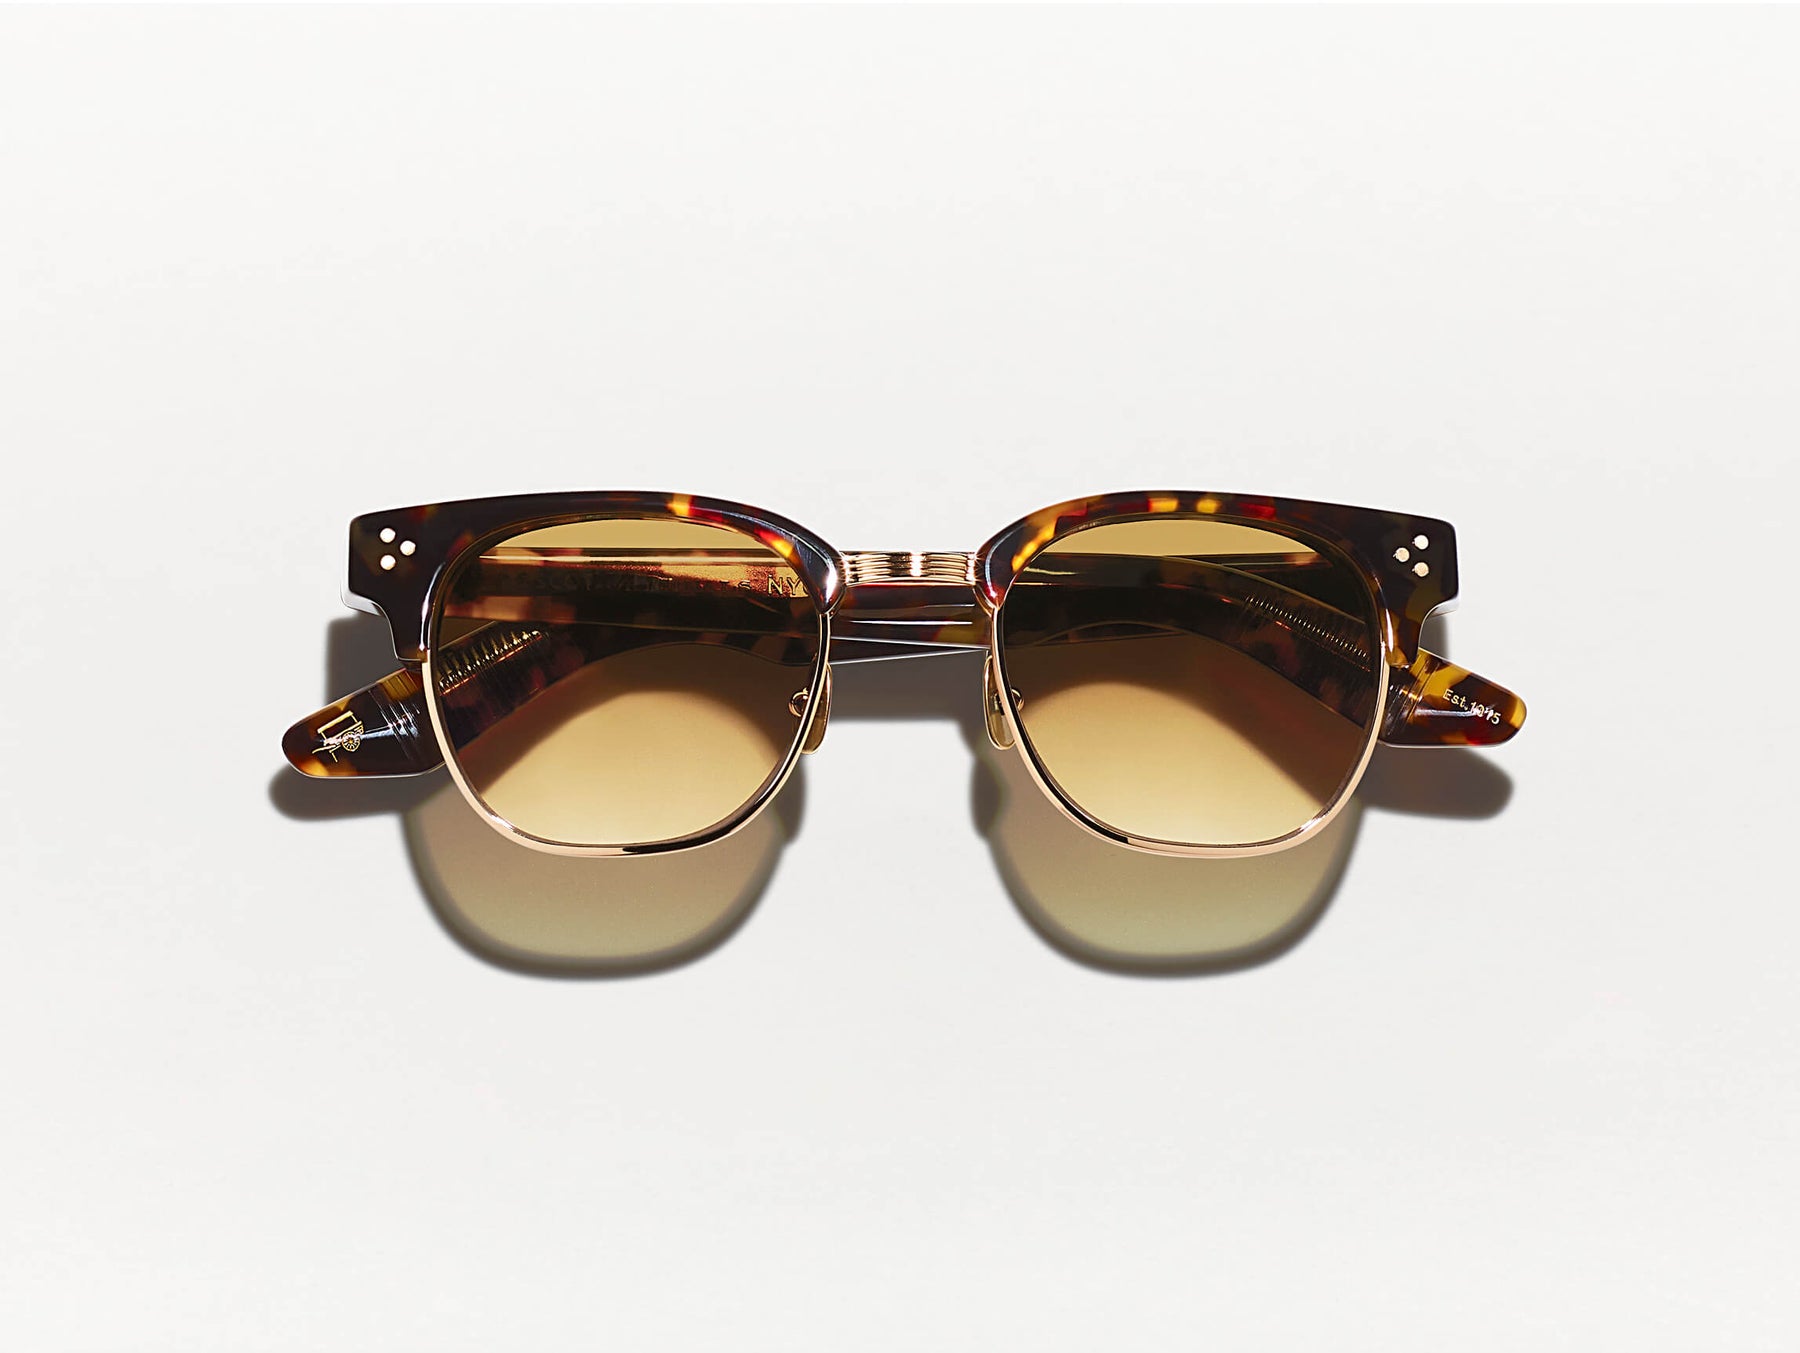 The TINIF SUN in Tortoise/Gold with Chestnut Fade Tinted Lenses